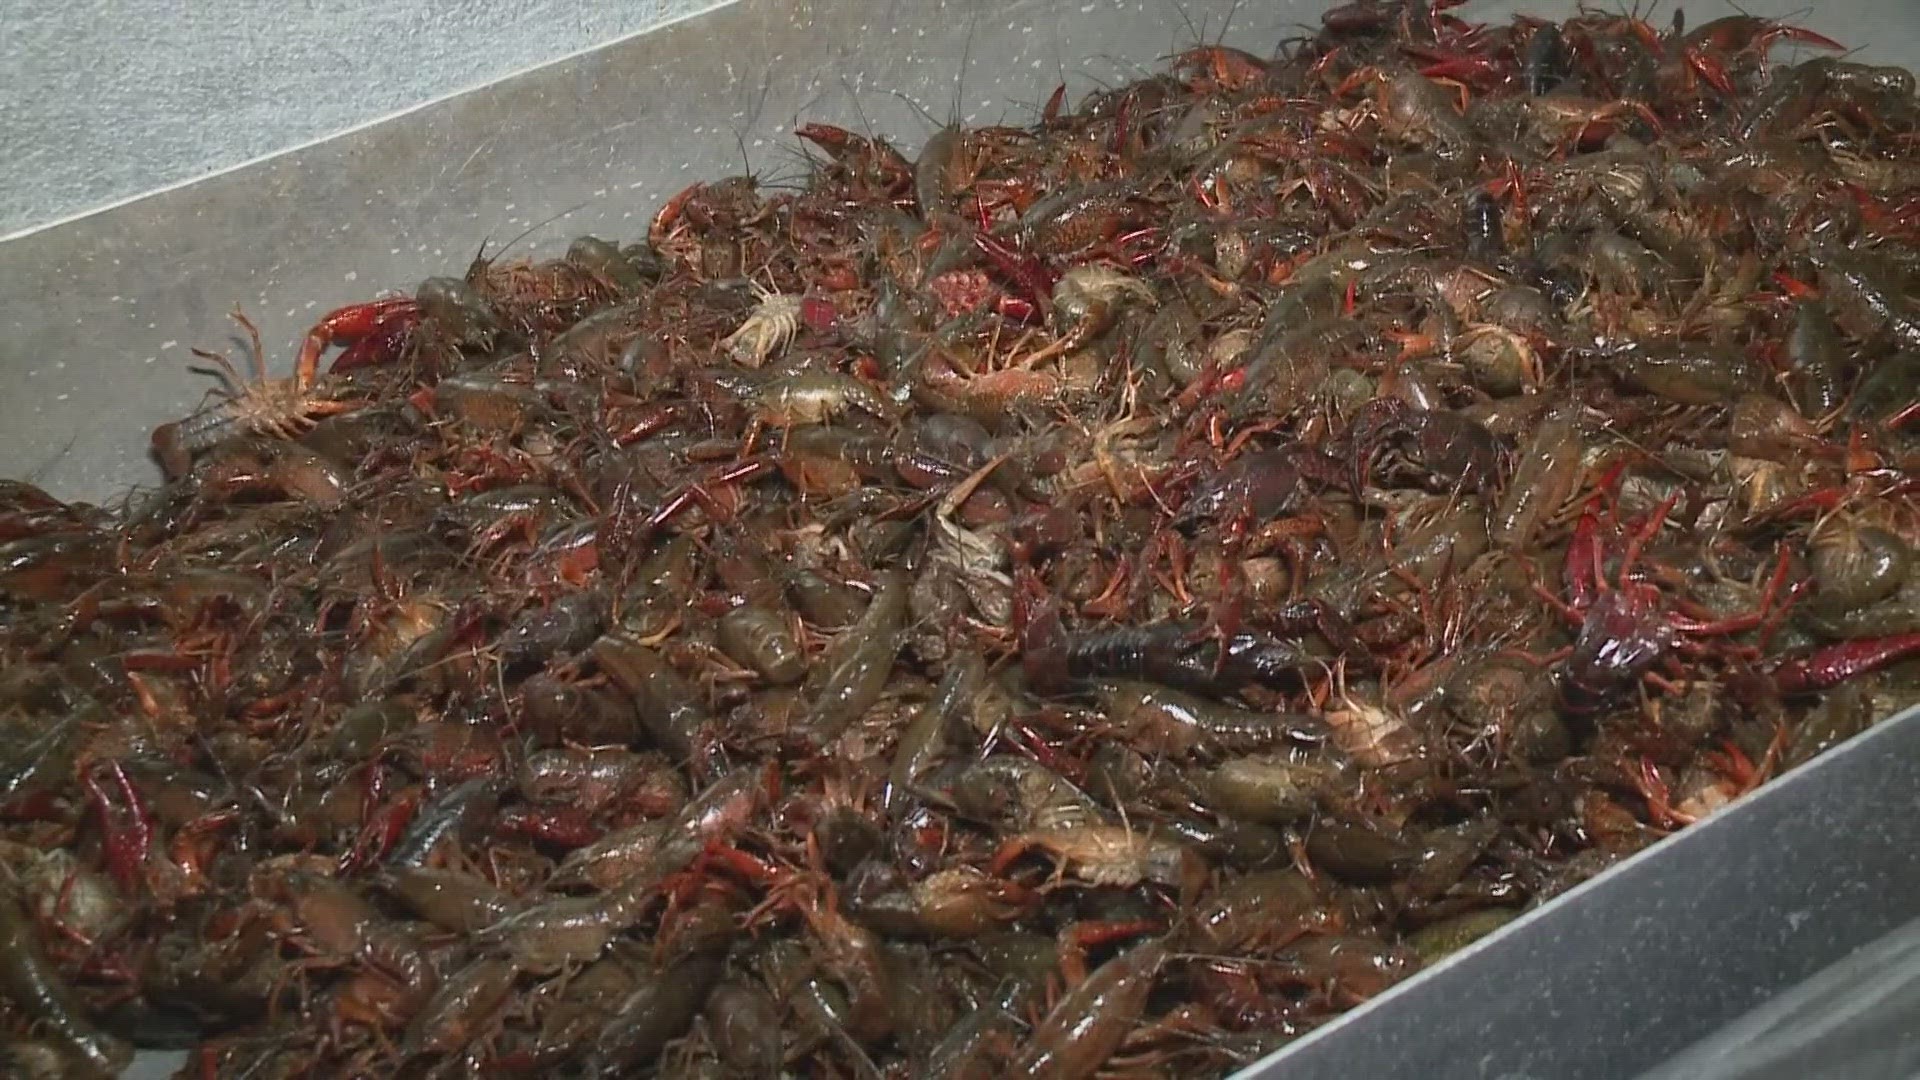 Lt. Gov. Billy Nungesser talks with WWL Loiuisiana about the shortage of Louisiana crawfish and what it means for the state's